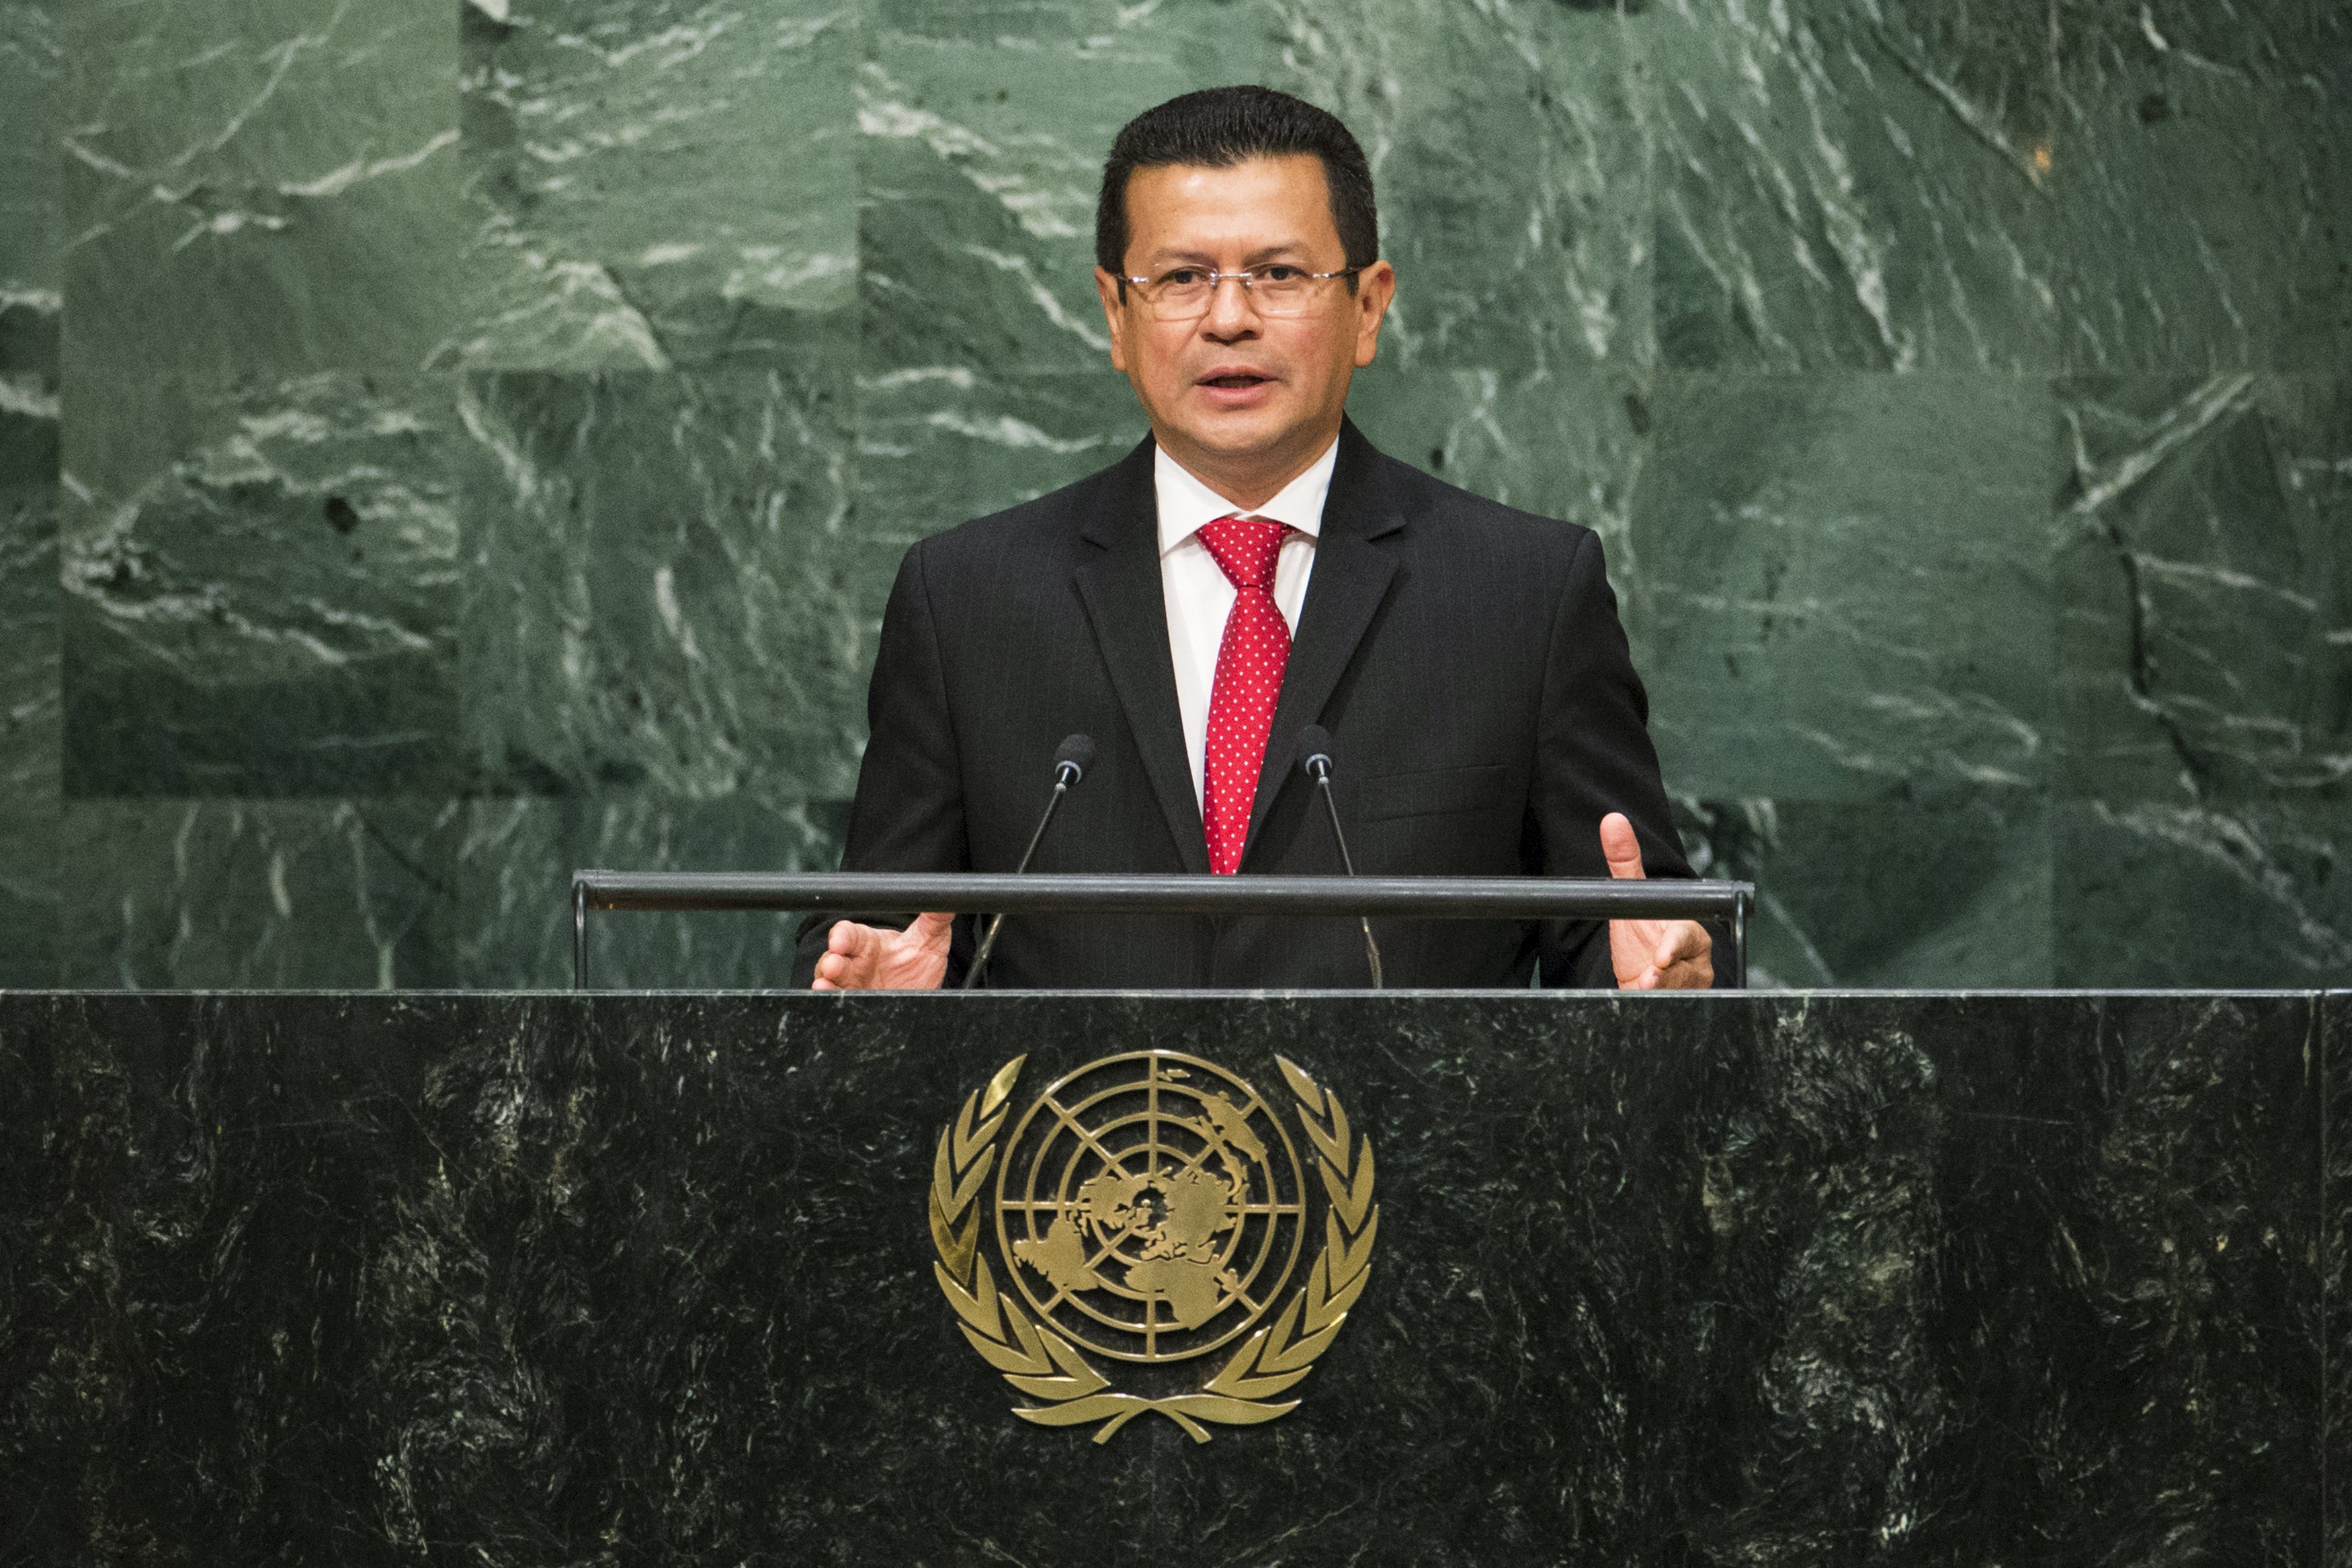 El Salvador's Foreign Minister Hugo Martinez addresses attendees during the 70th session of the United Nations General Assembly at the U.N. Headquarters in New York, October 3, 2015.